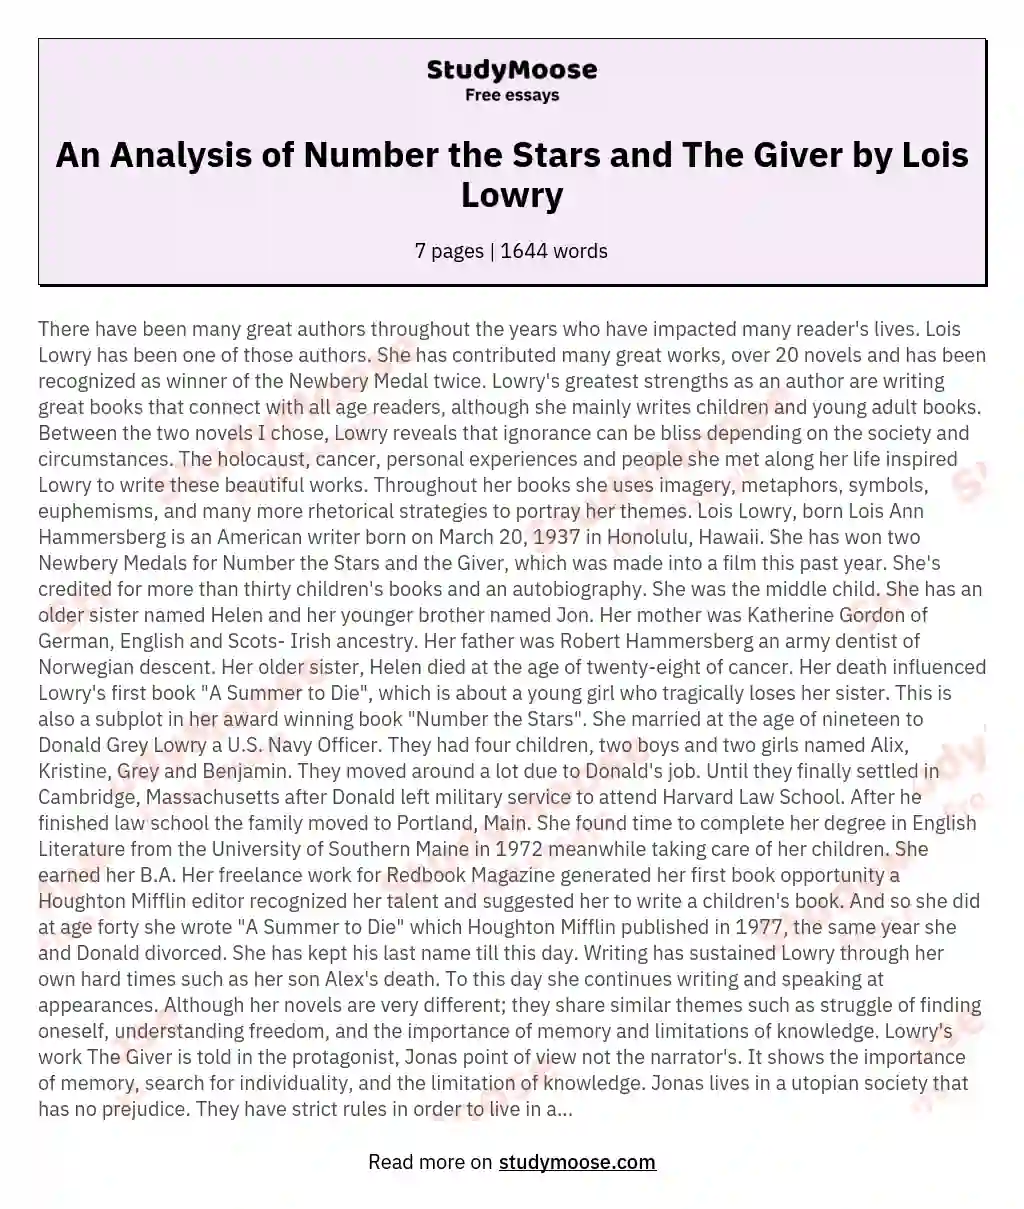 An Analysis of Number the Stars and The Giver by Lois Lowry essay